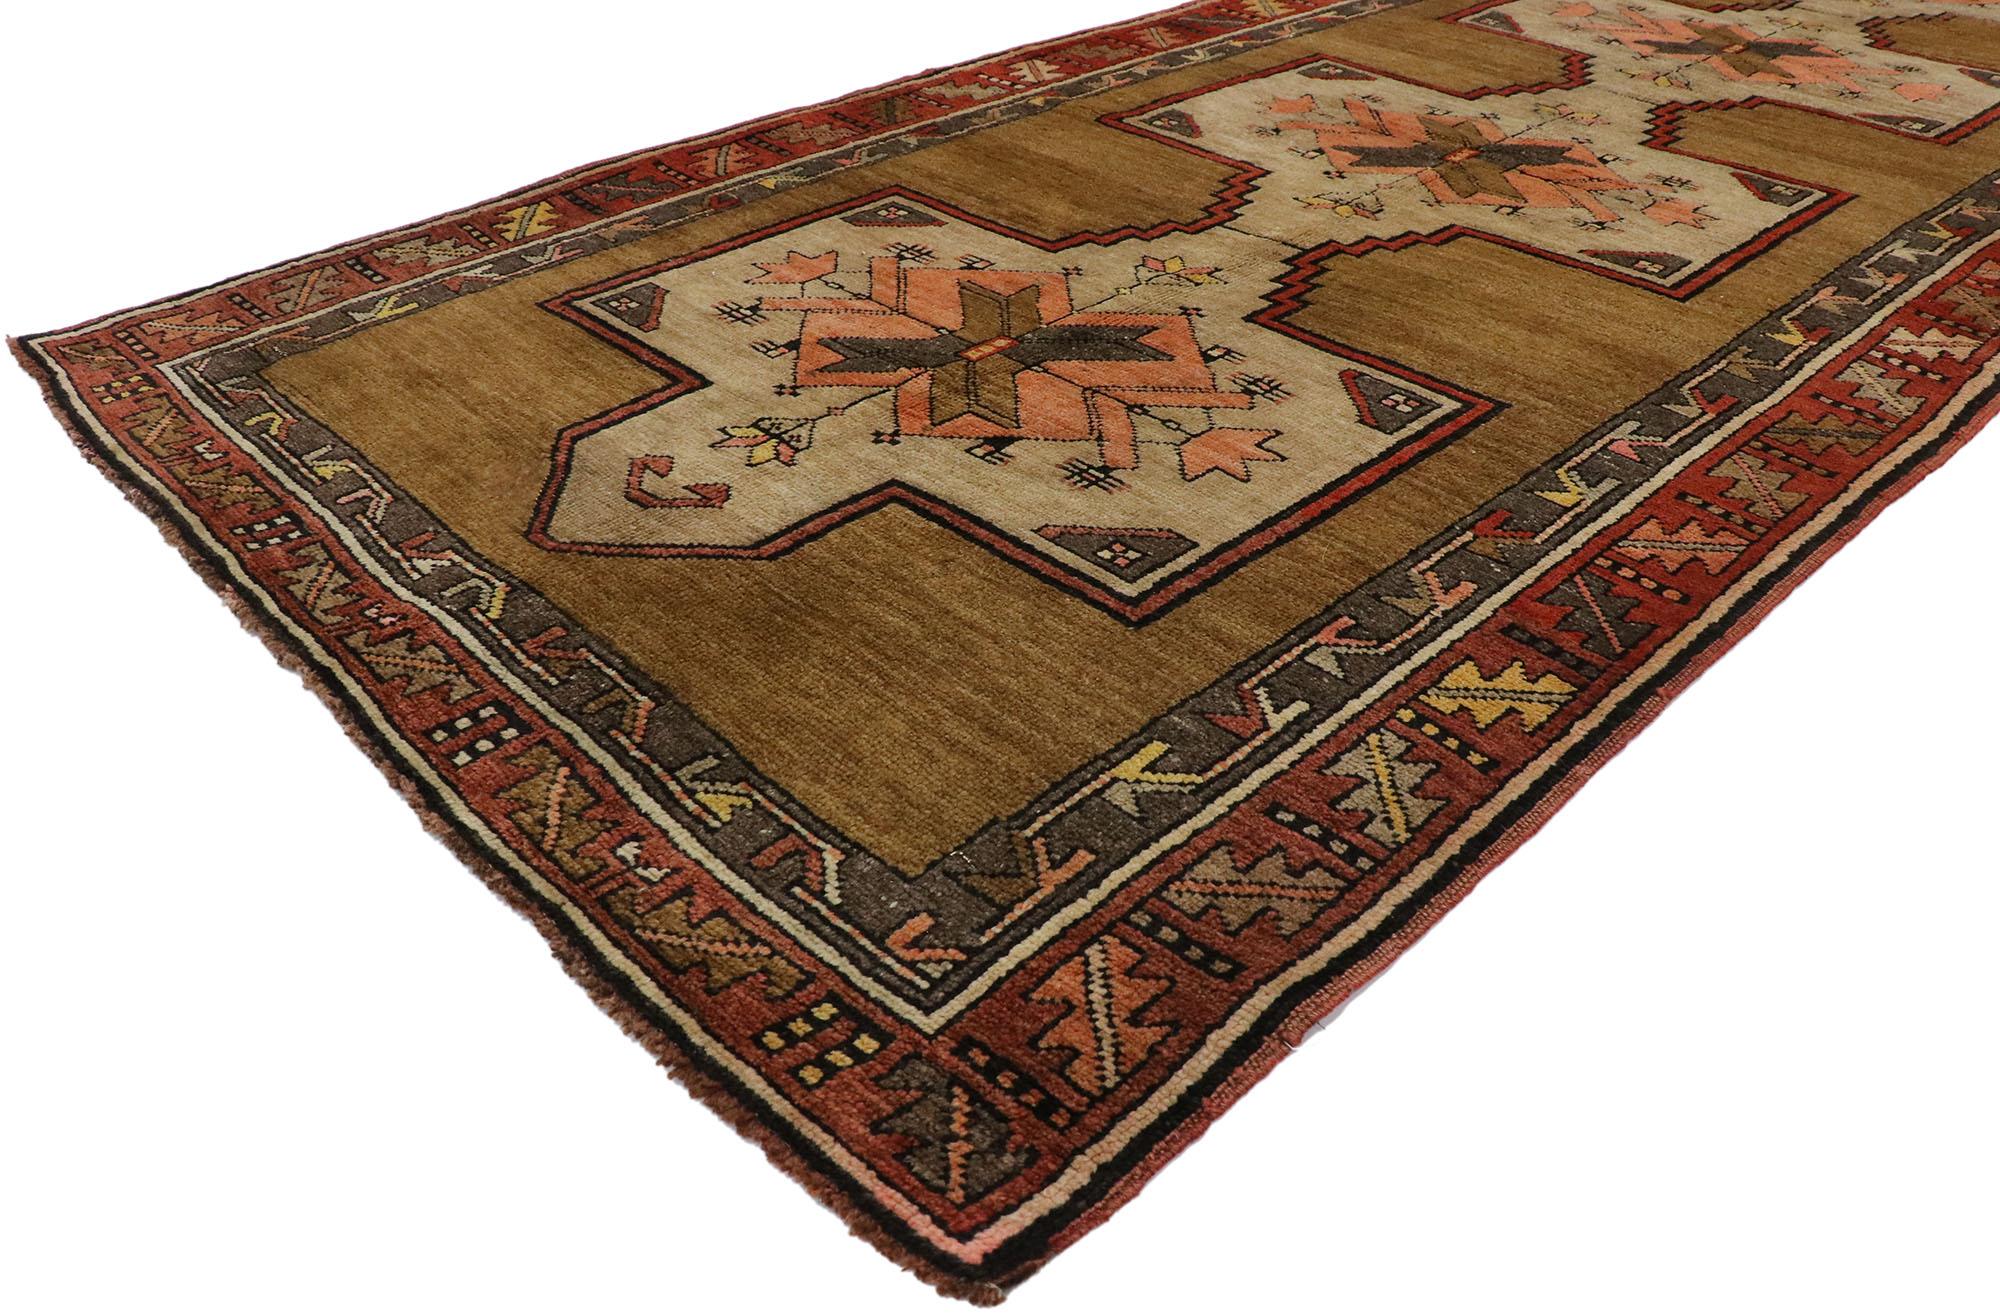 ?53397 Vintage Turkish Kars Runner with Mid-Century Modern style. ??With its luminous warm hues and beguiling beauty, this hand knotted wool vintage Turkish Kars runner will take on a curated lived-in look that feels timeless while imparting a sense